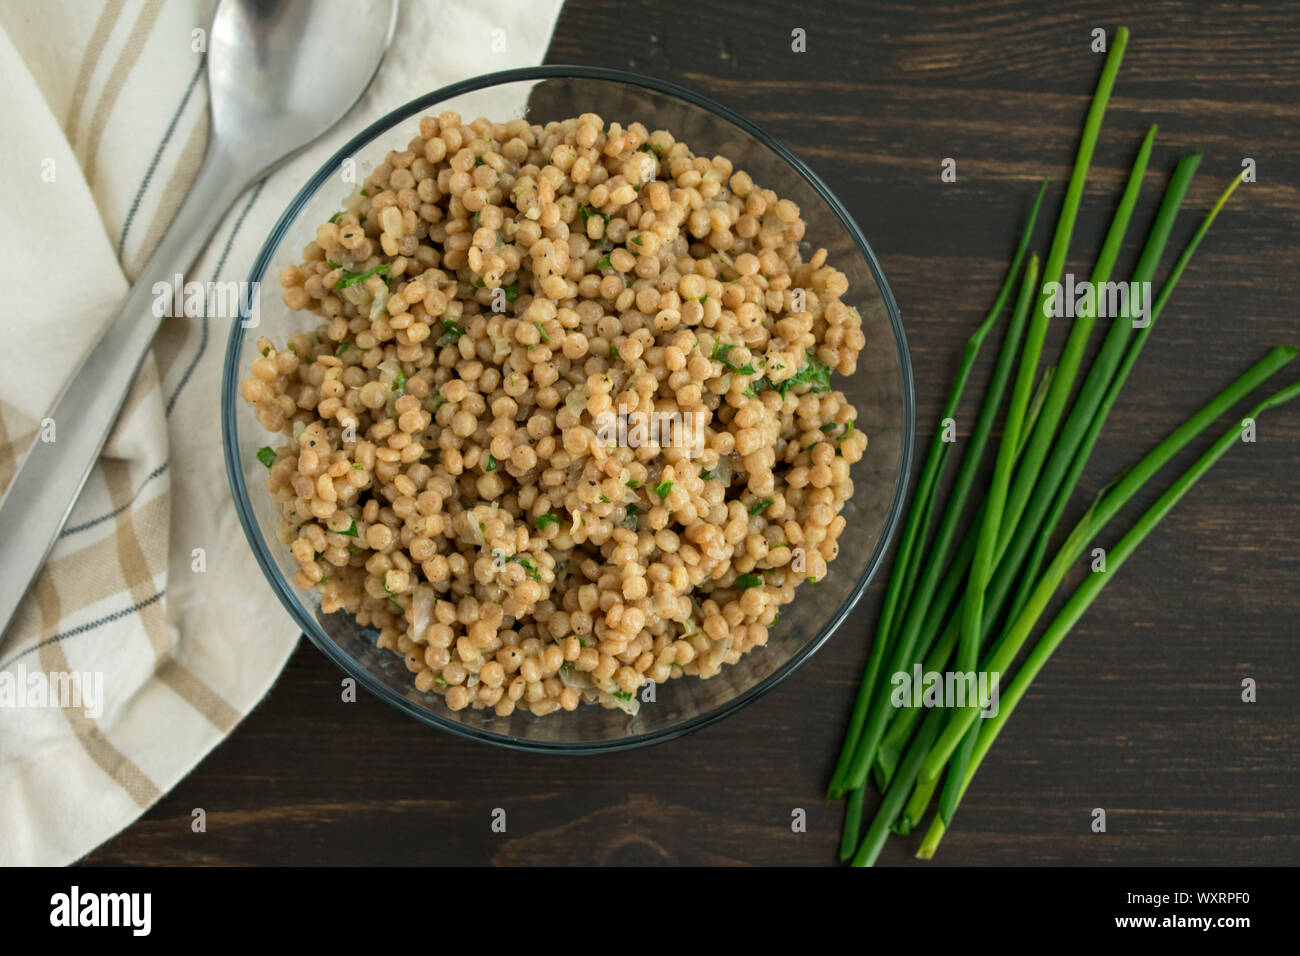 Herbed Couscous Pilaf with Chives: A bowl of whole wheat pearl couscous with fresh chives, a spoon, and a napkin. Stock Photo